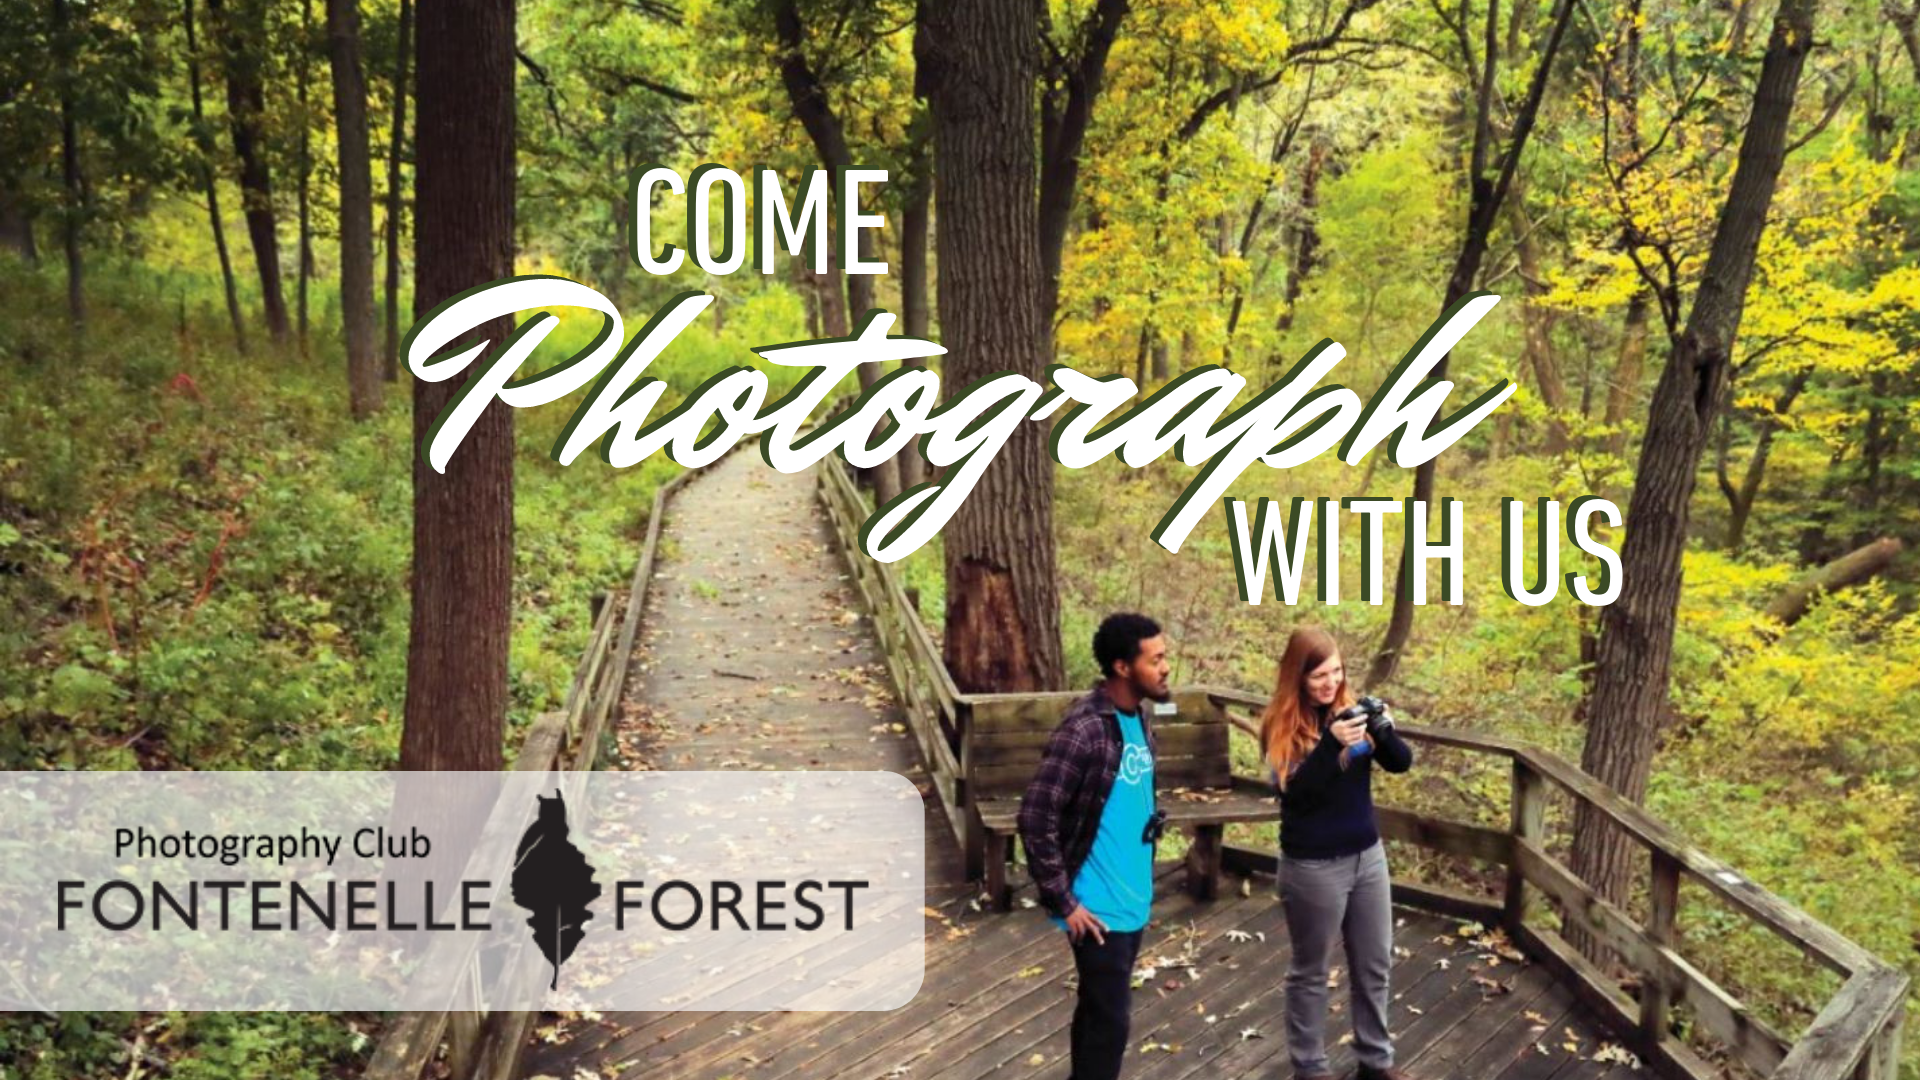 Come Photograph with Us graphic